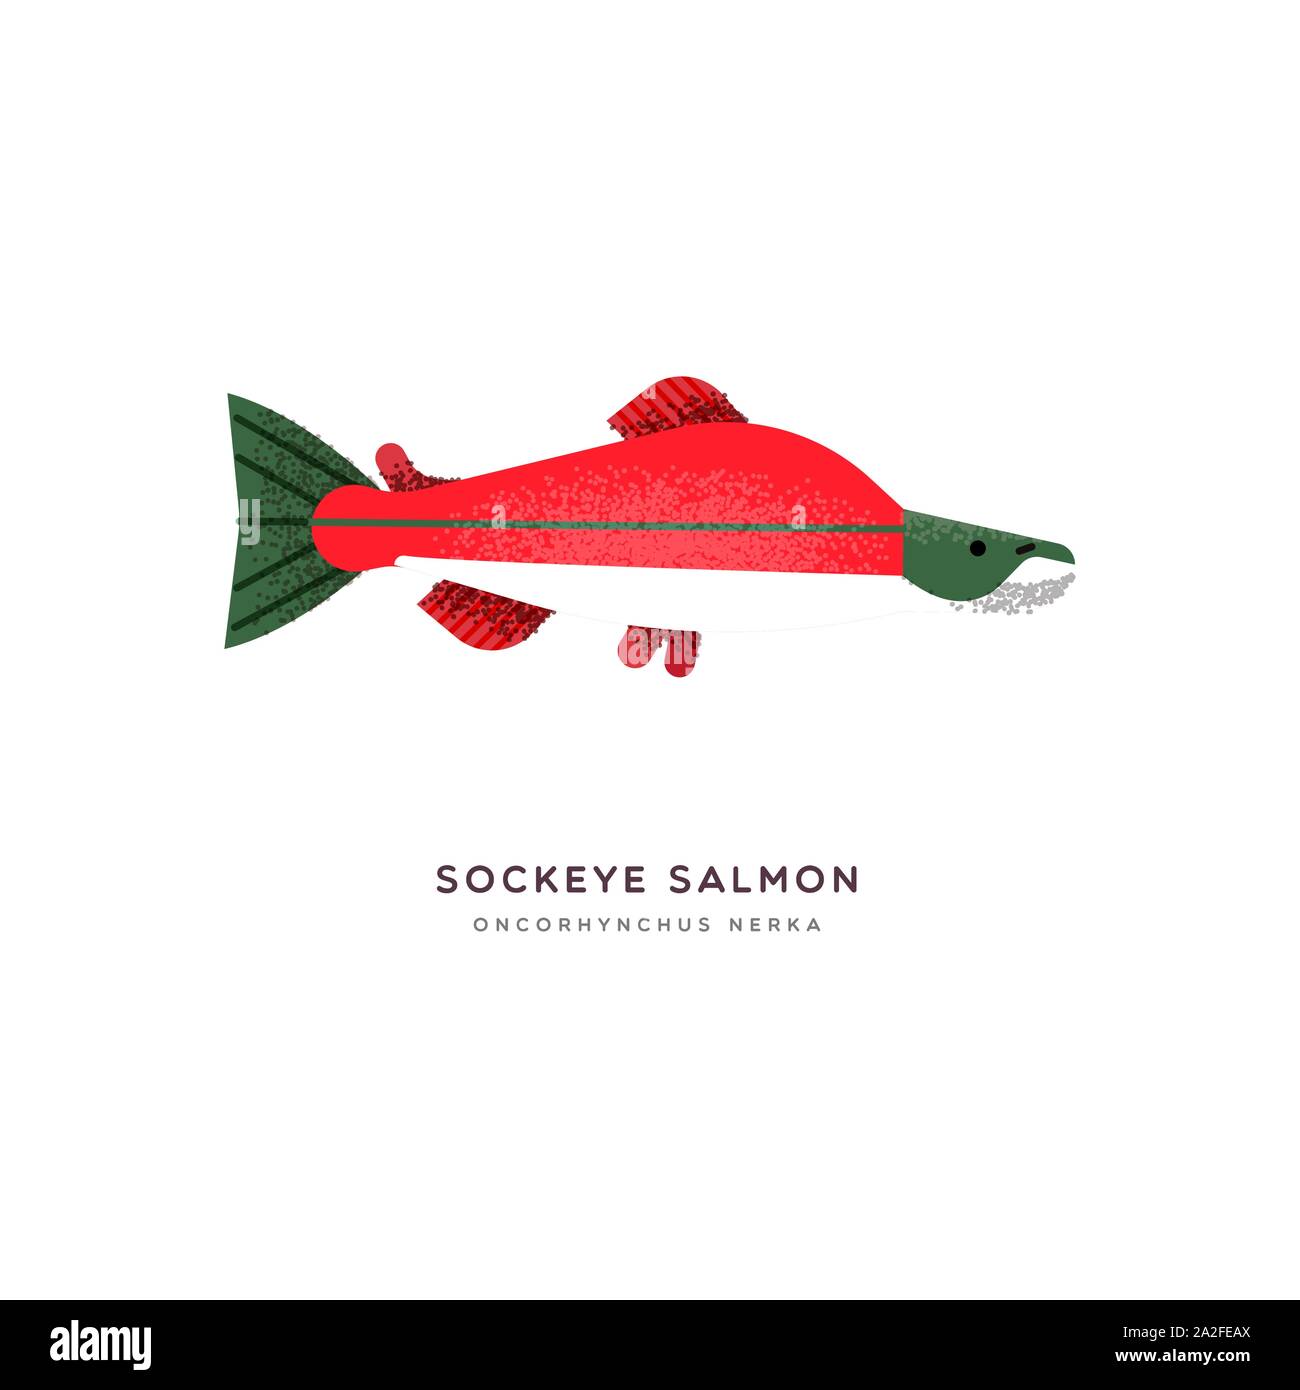 Sockeye salmon animal illustration of red fish on isolated white background. Educational wildlife design with fauna species name label. Stock Vector